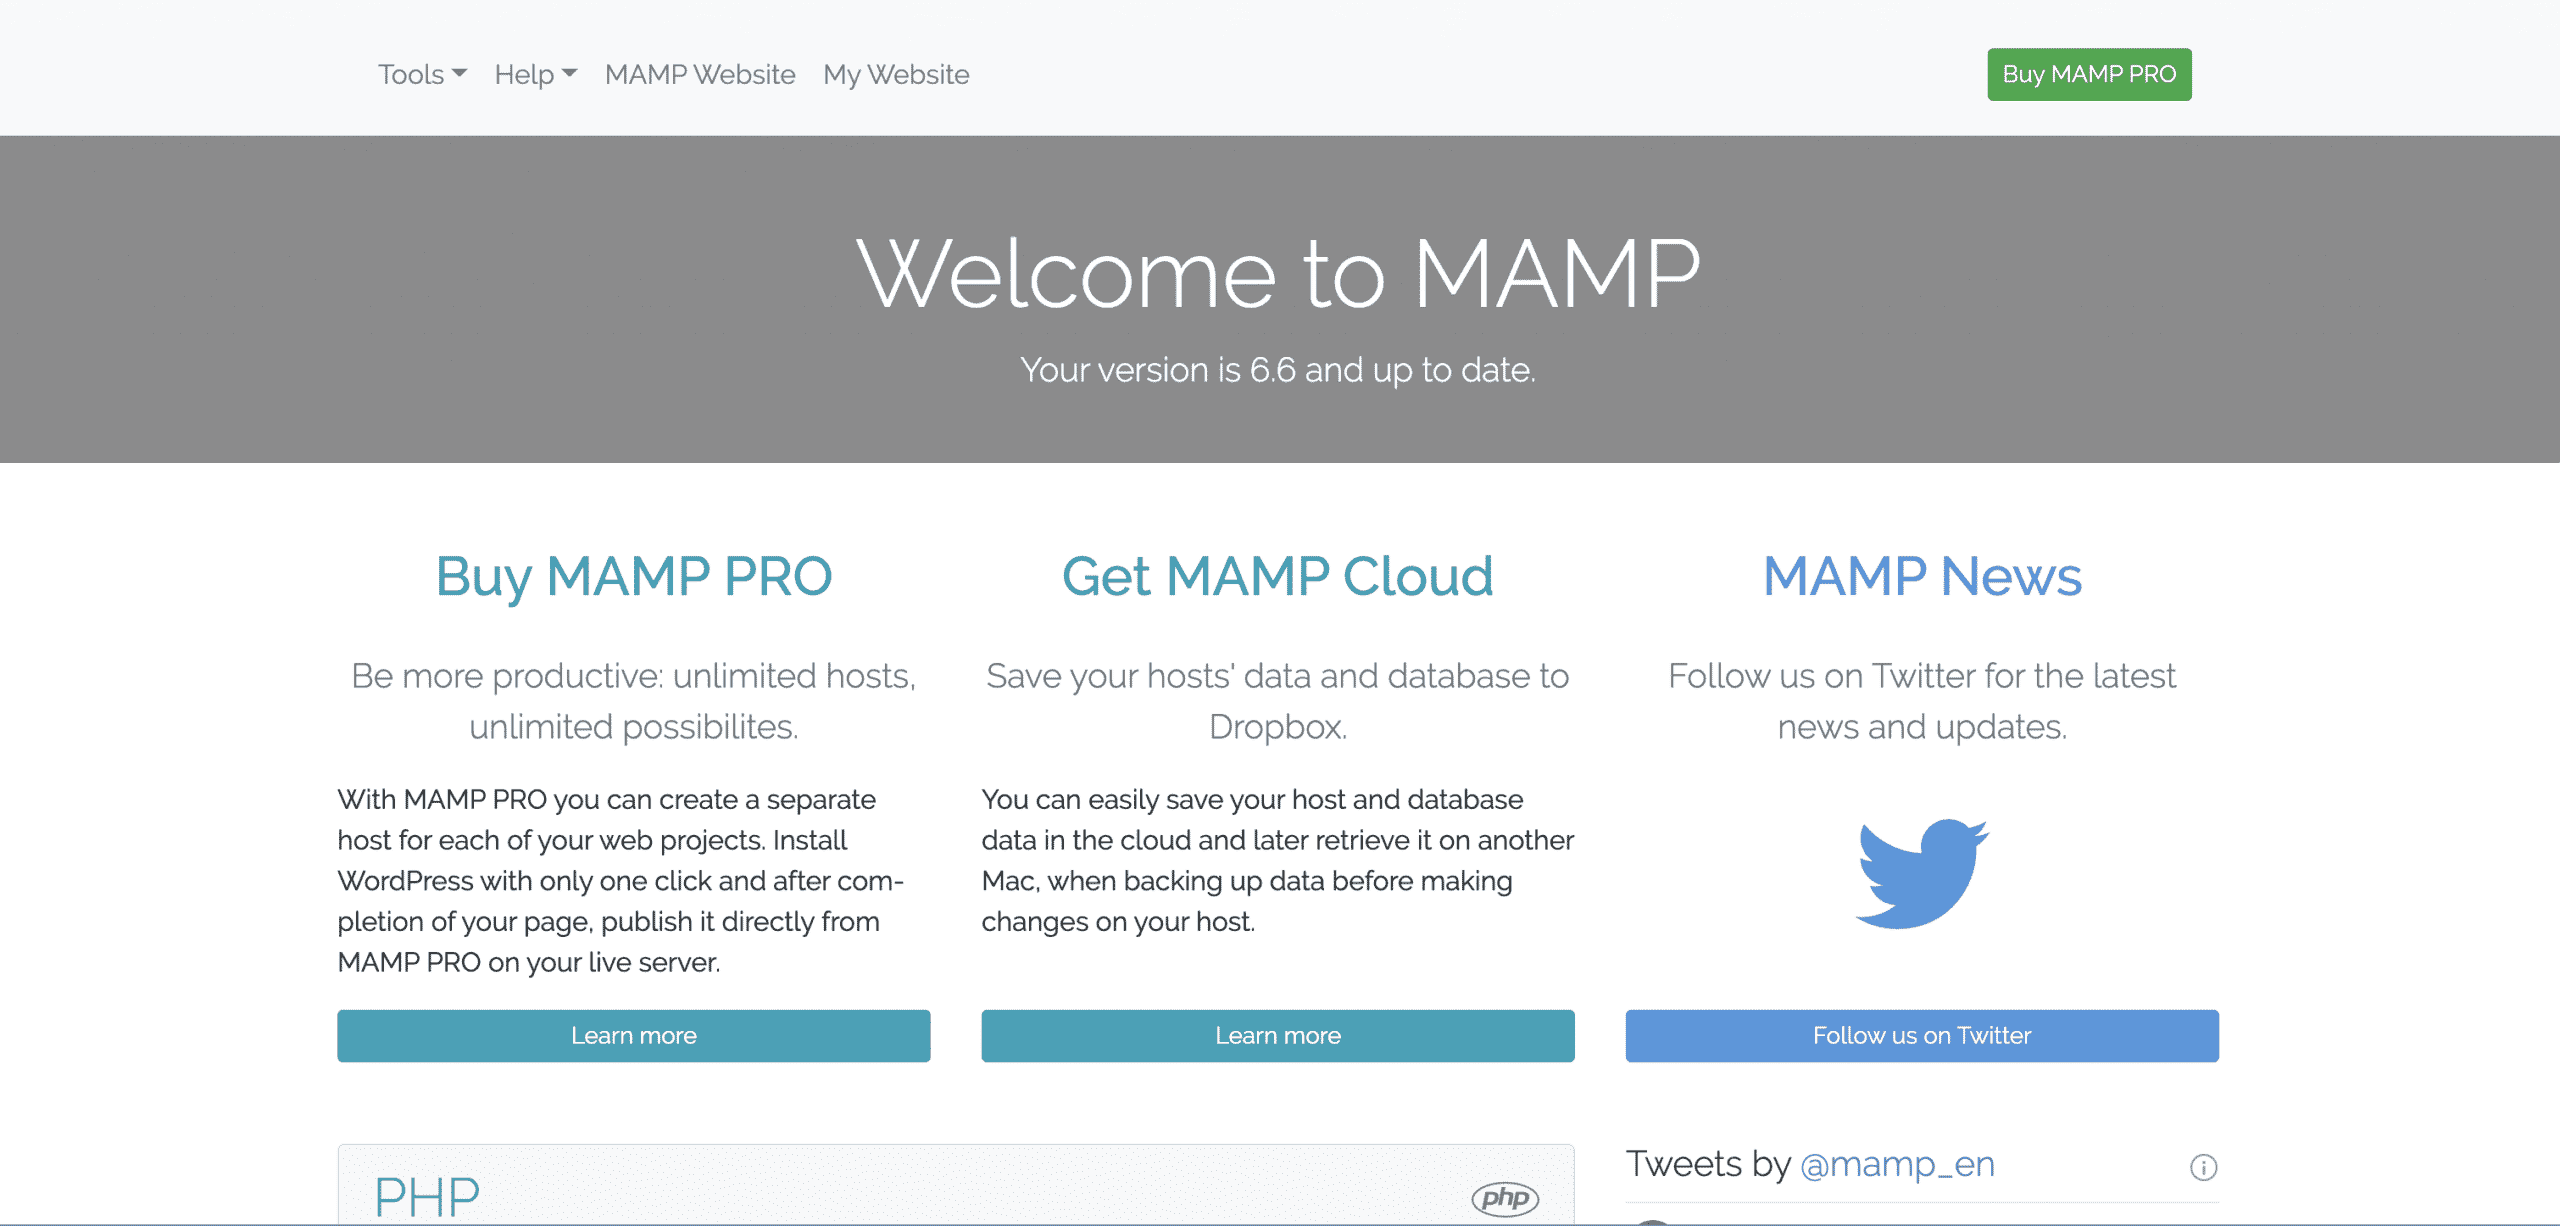 mamp main screen redirect after setting up website